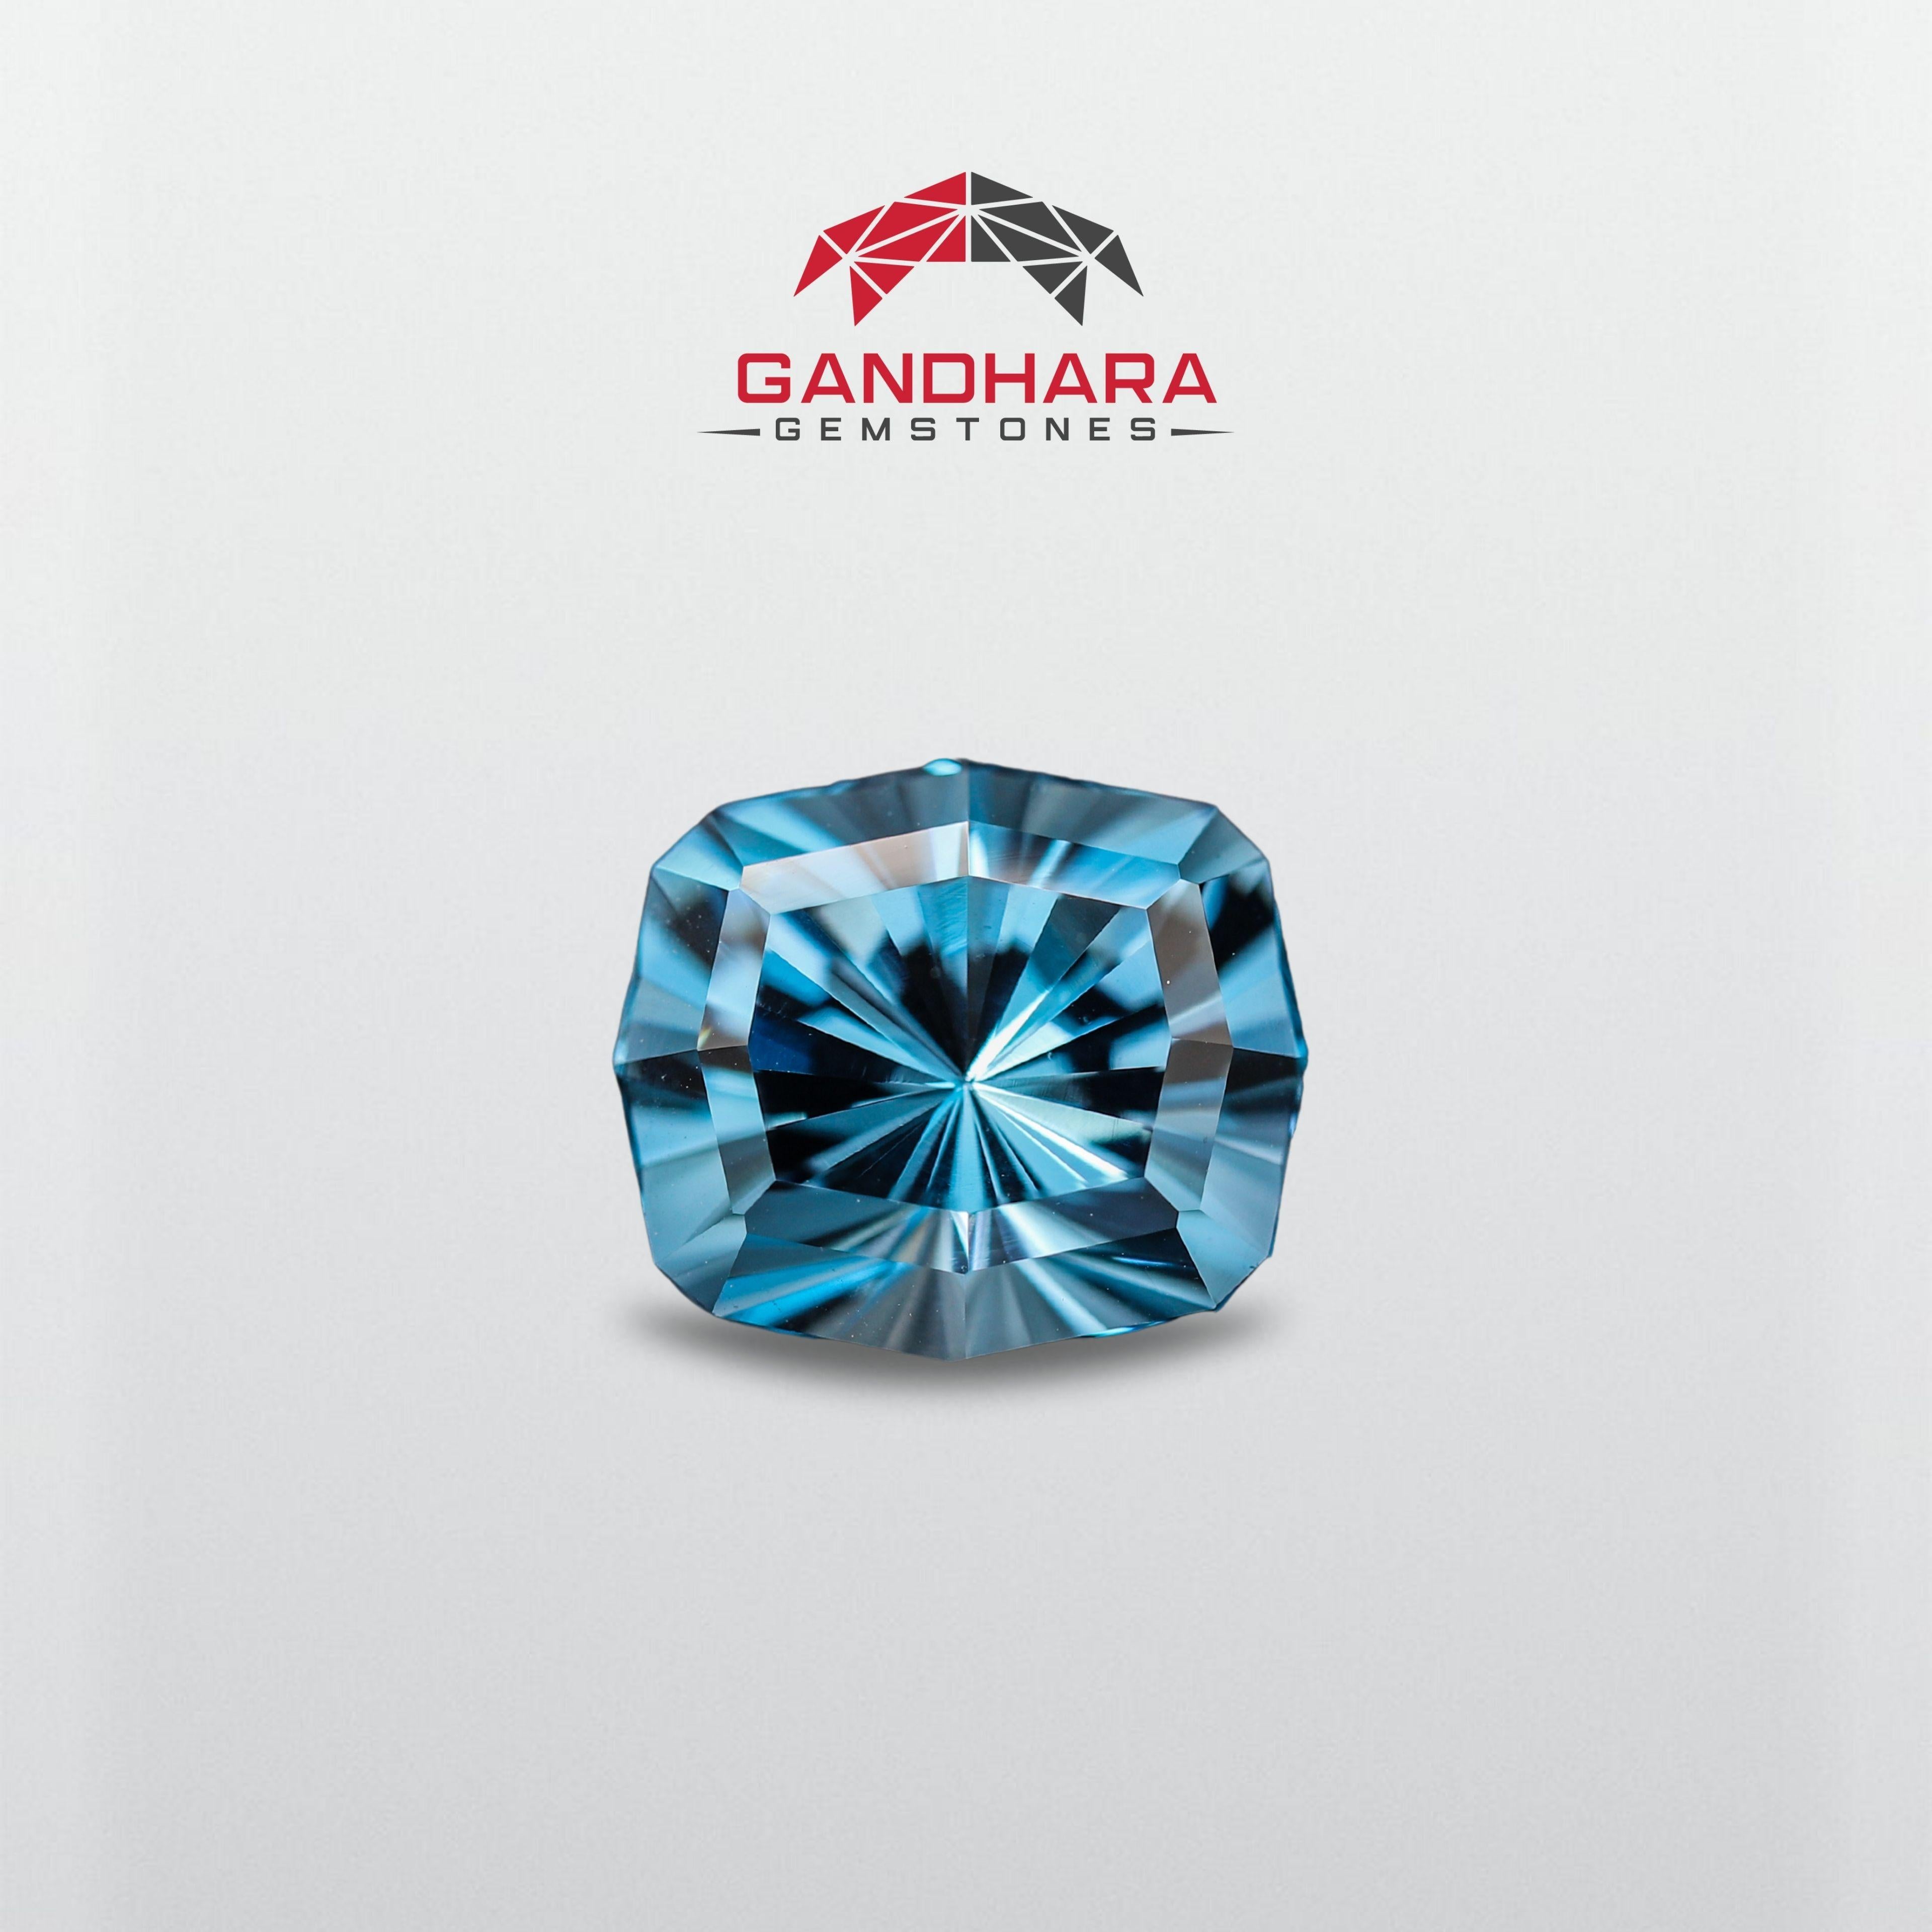 Topaz is a tremendous blue colored, semi-precious gemstone from the Topaz mineral family. The name Topaz comes from the Sanskrit word 